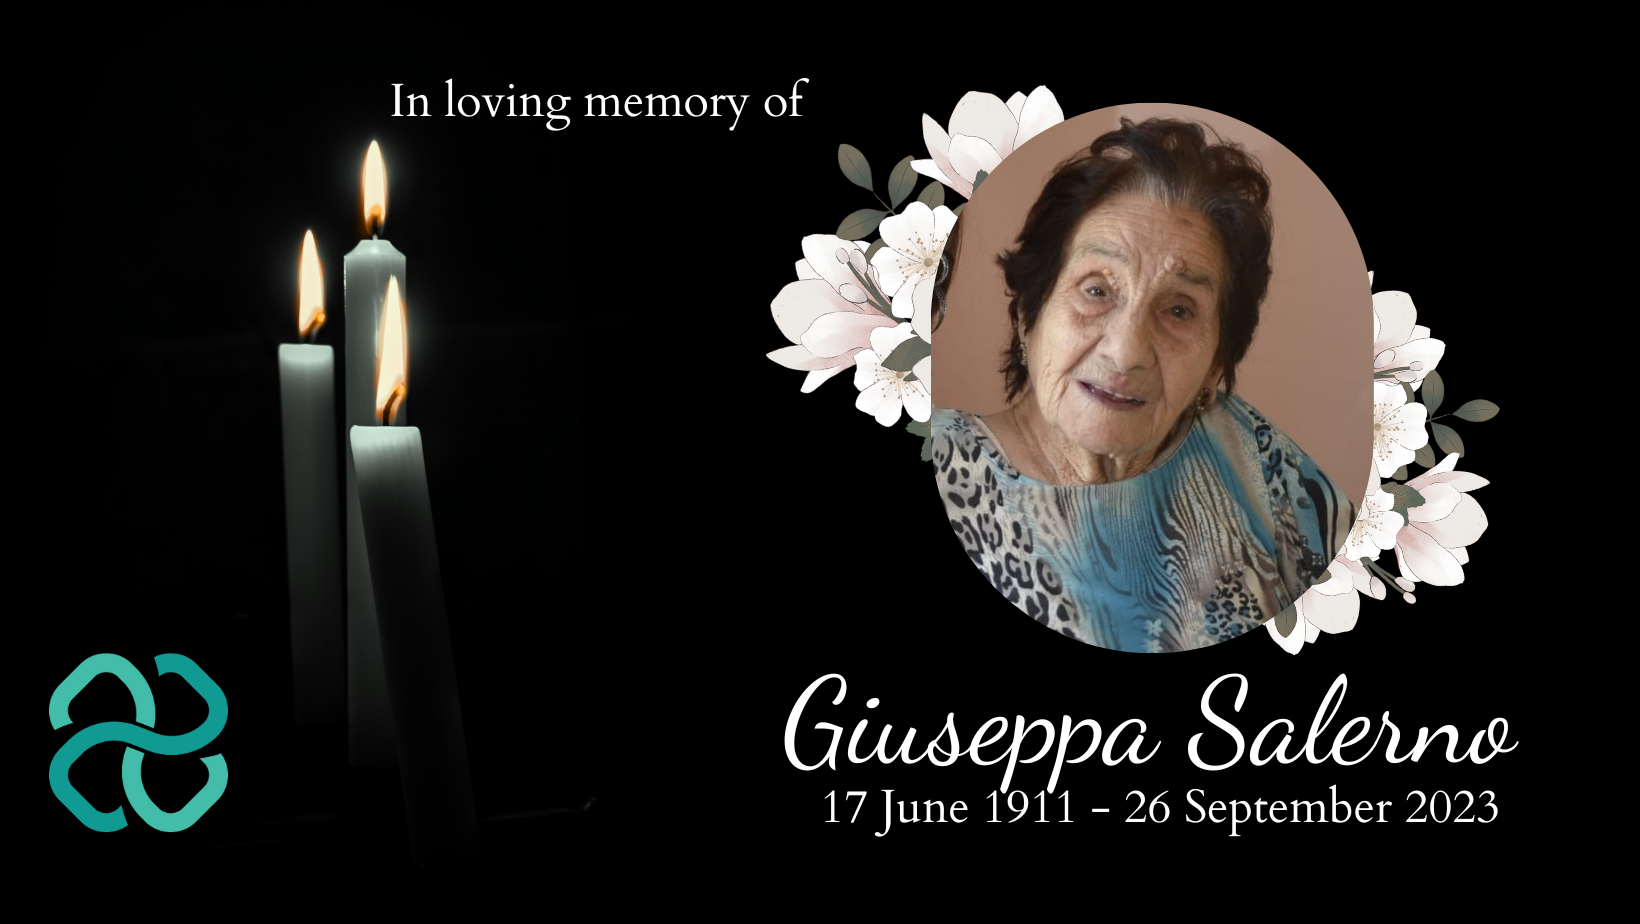 Giuseppa Salerno, Italy’s Fifth-Oldest Living Person, Passed Away at Age 112